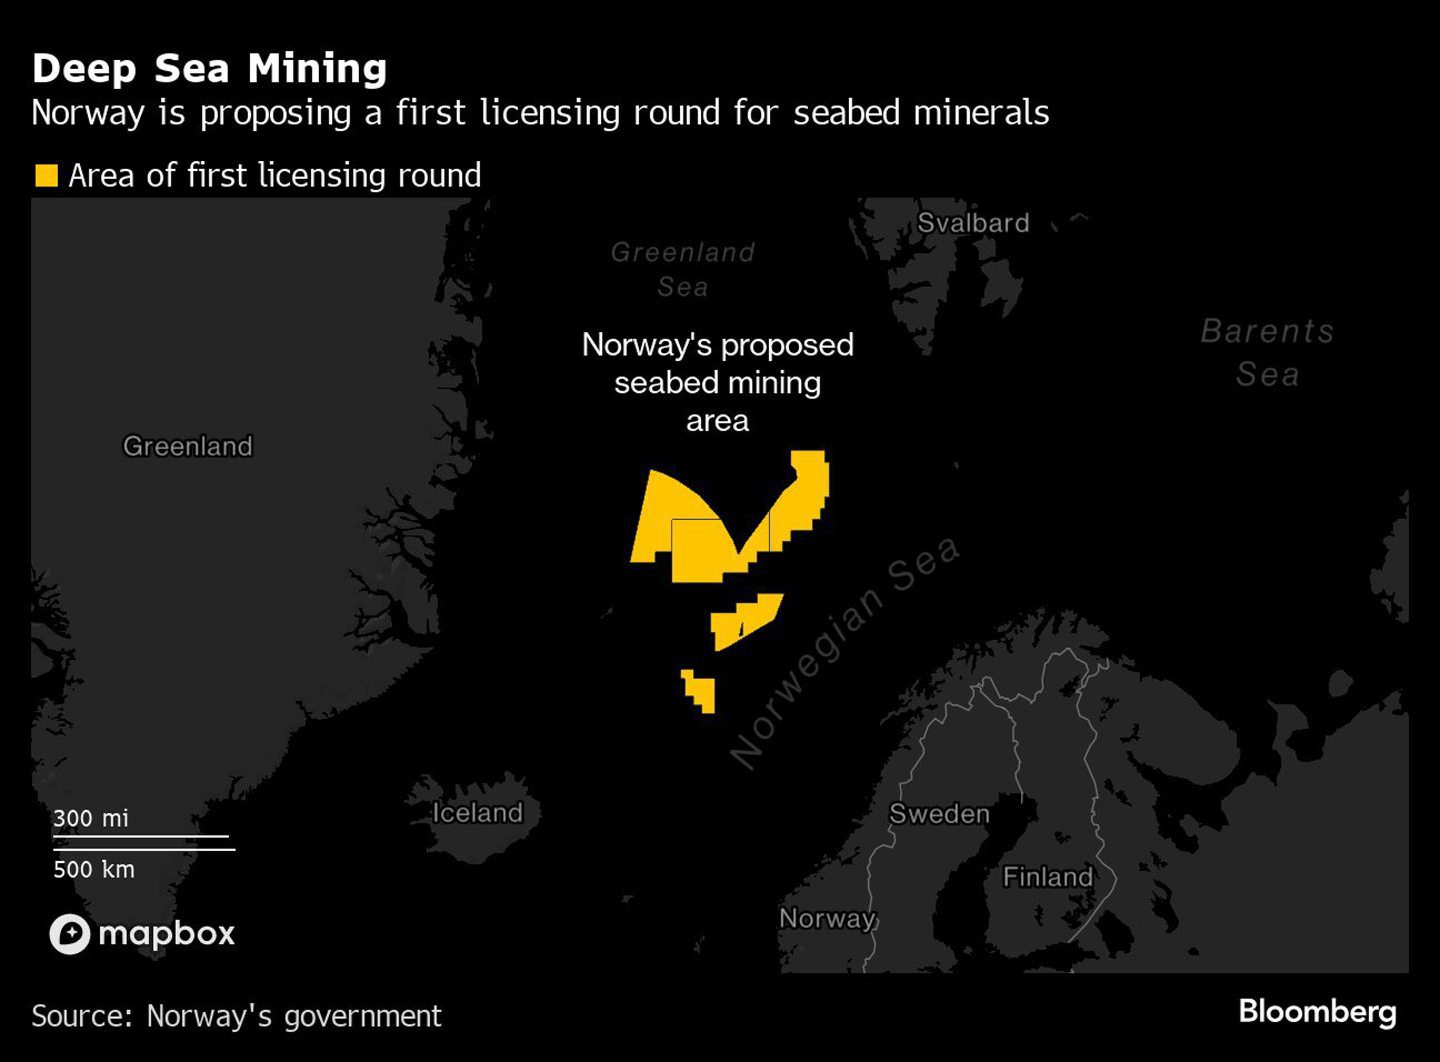 Norway proposes first acreage for deep sea mining in Arctic